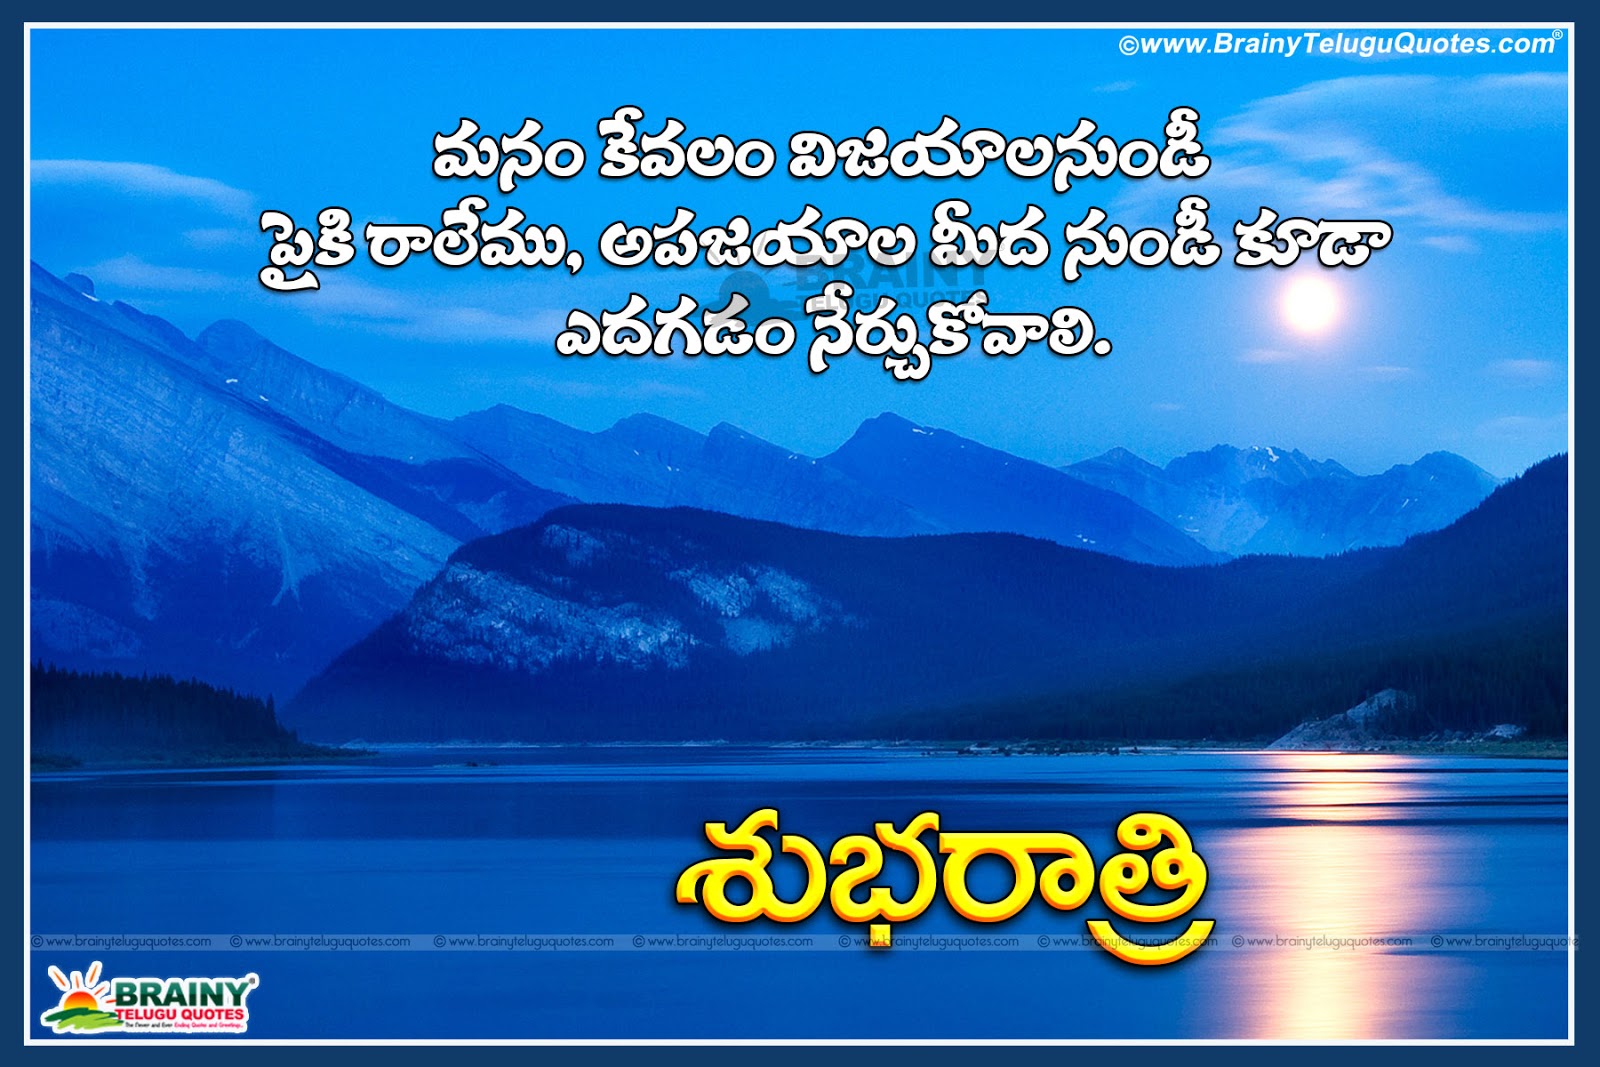 wallpapers Love Heart Touching Life Quotes Good Night Quotes In Telugu hind...